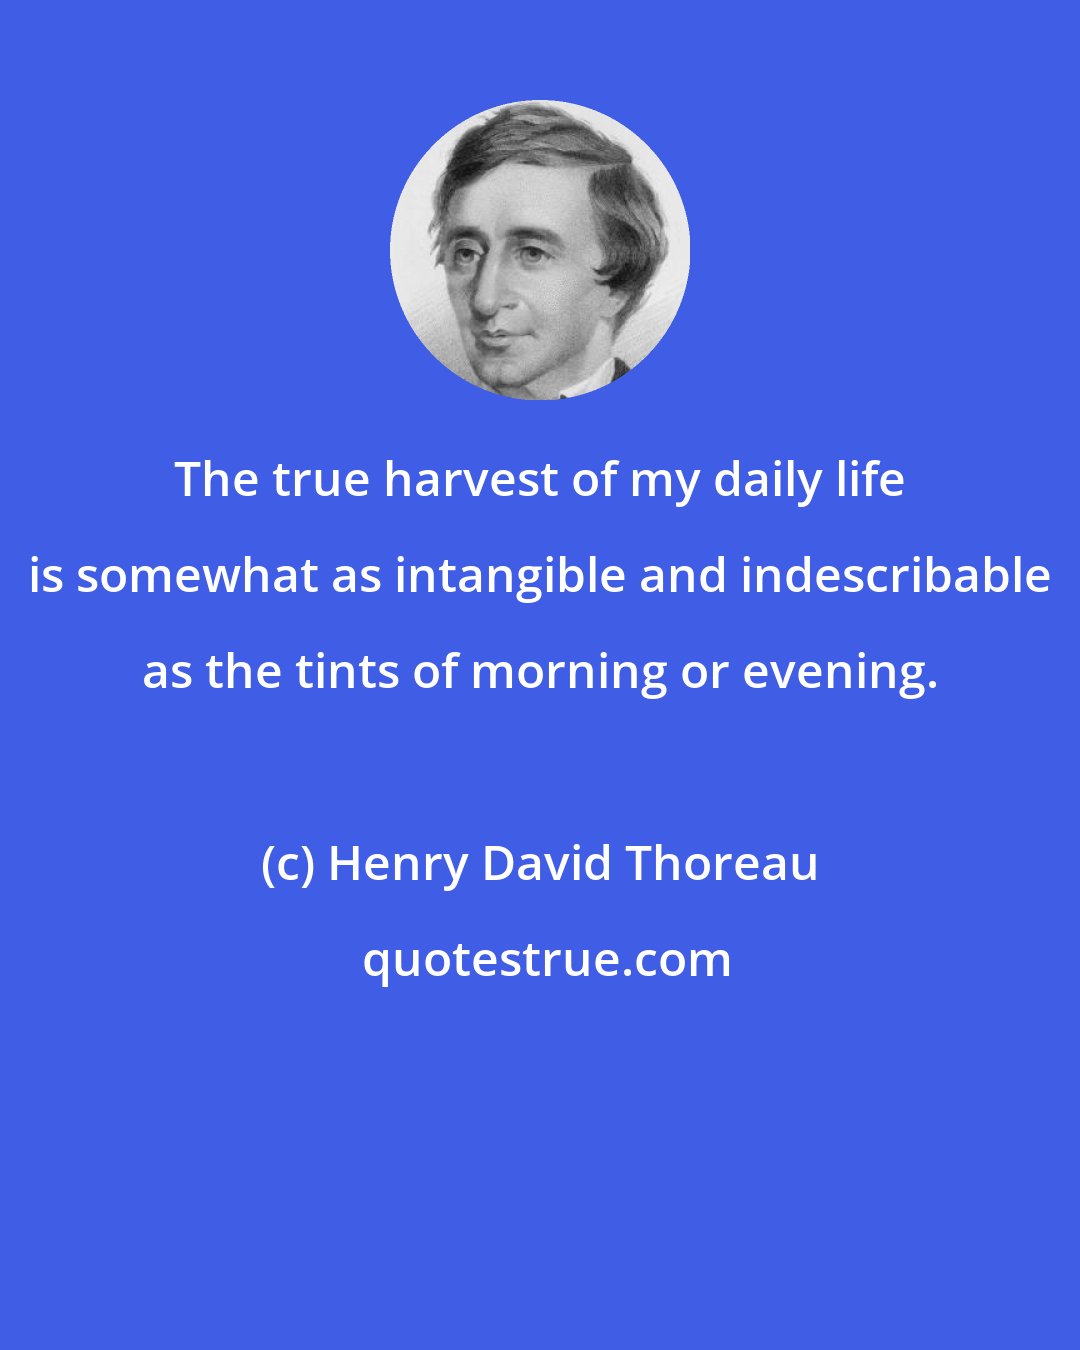 Henry David Thoreau: The true harvest of my daily life is somewhat as intangible and indescribable as the tints of morning or evening.